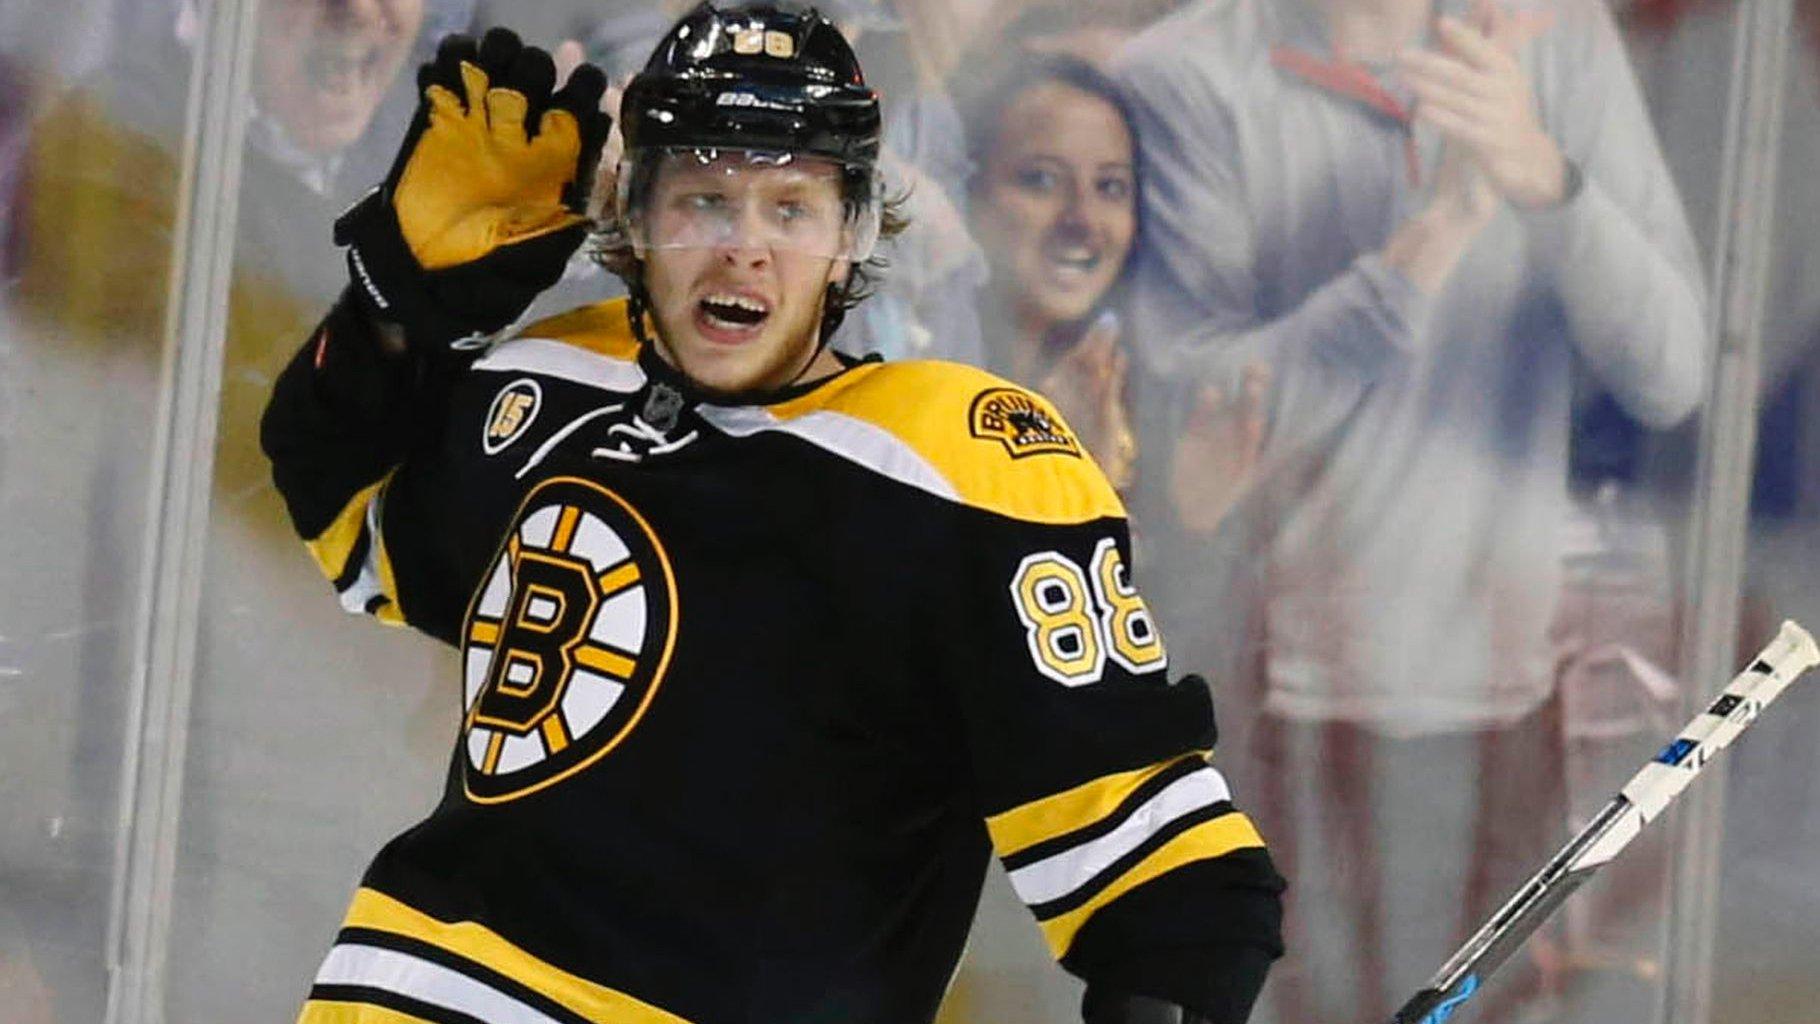 Bruins vs Maple Leafs predictions, NHL odds & picks today